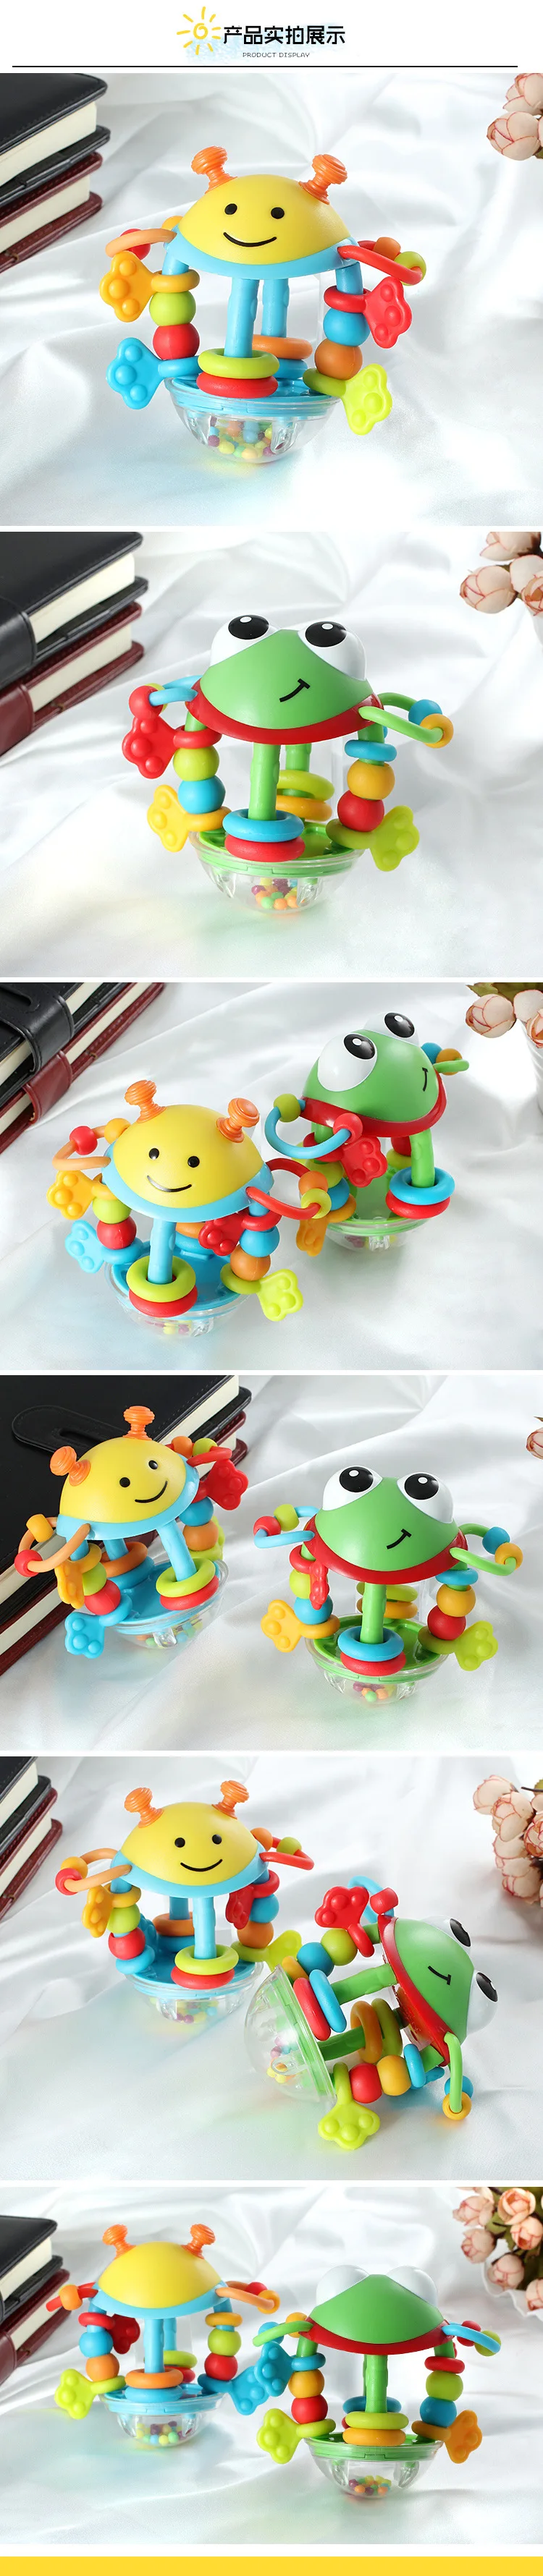 Newborn Soft Baby Toys 0-12 Months Animal Baby Rattle Hanging Bed Bell Crib Rattles Toys Educational Stroller Toy